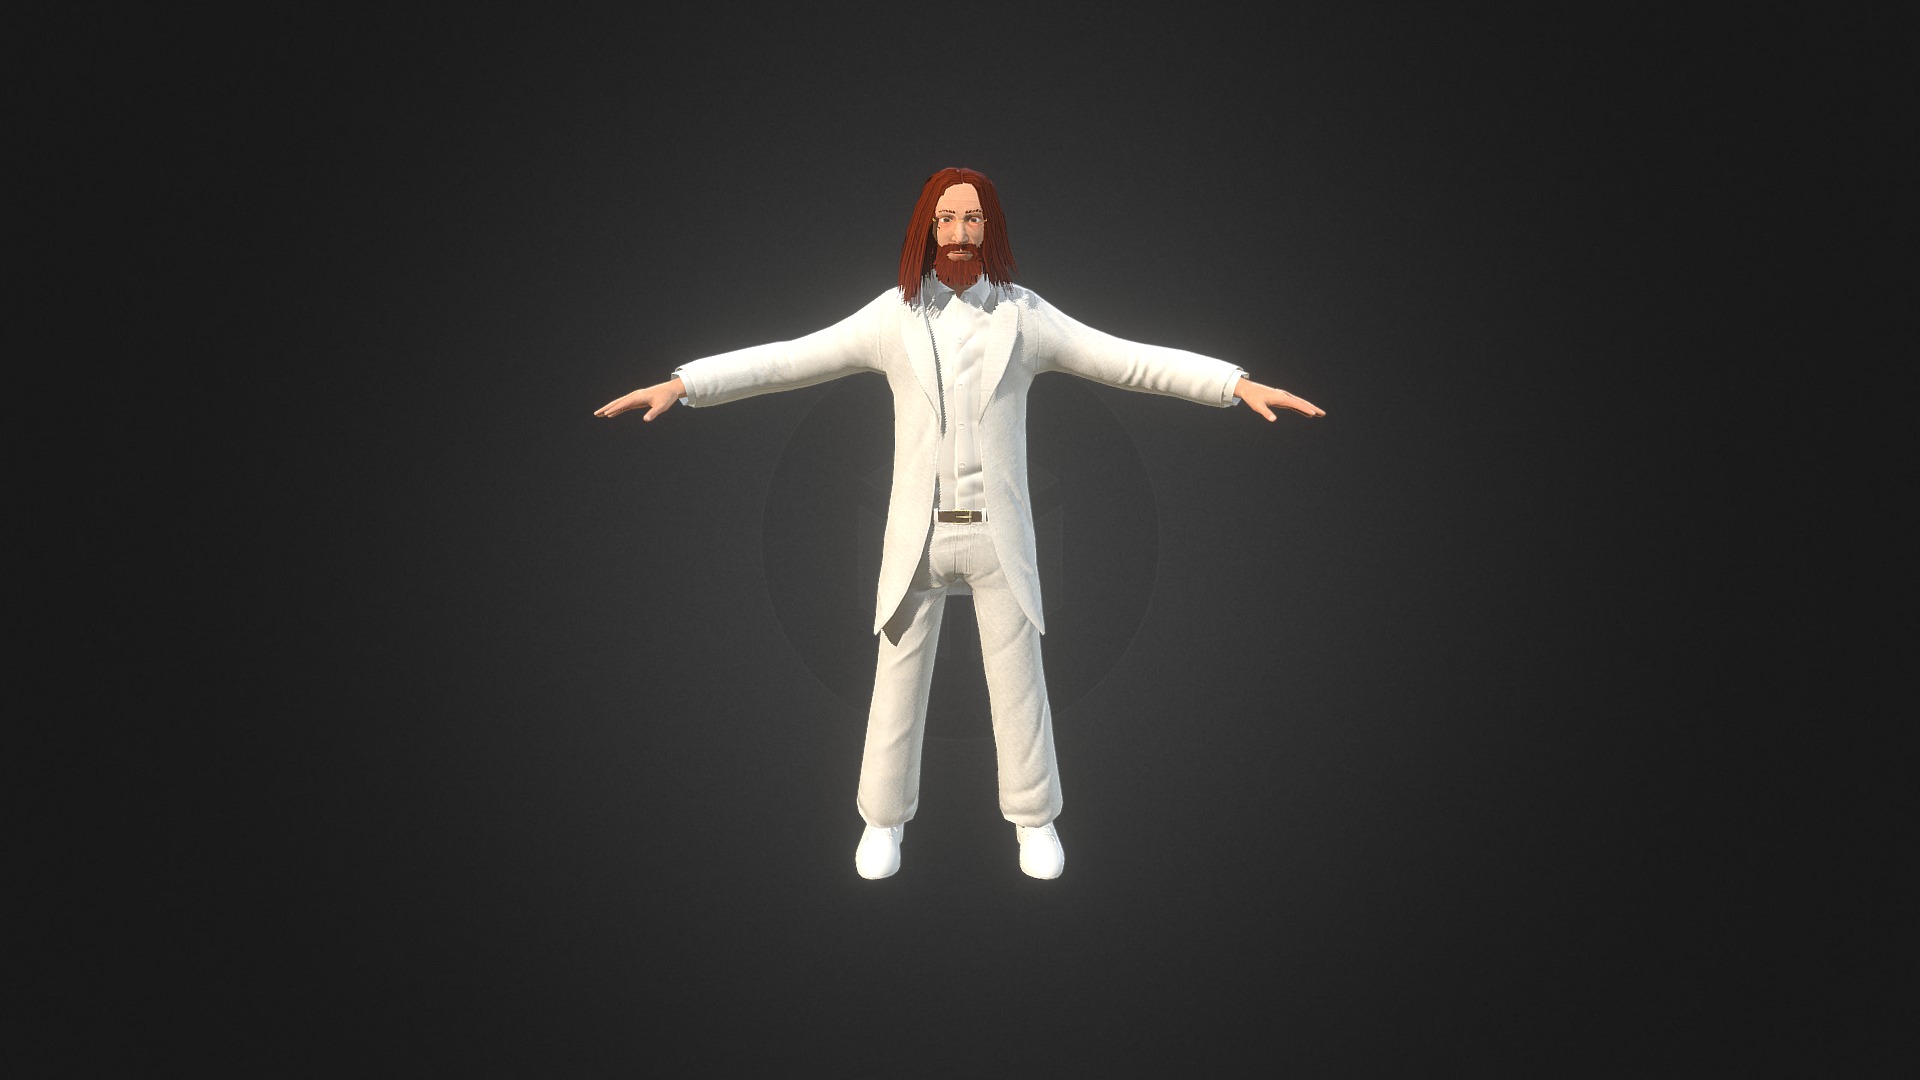 3D model John Lennon From Beatles Band - This is a 3D model of the John Lennon From Beatles Band. The 3D model is about a man in a white suit.